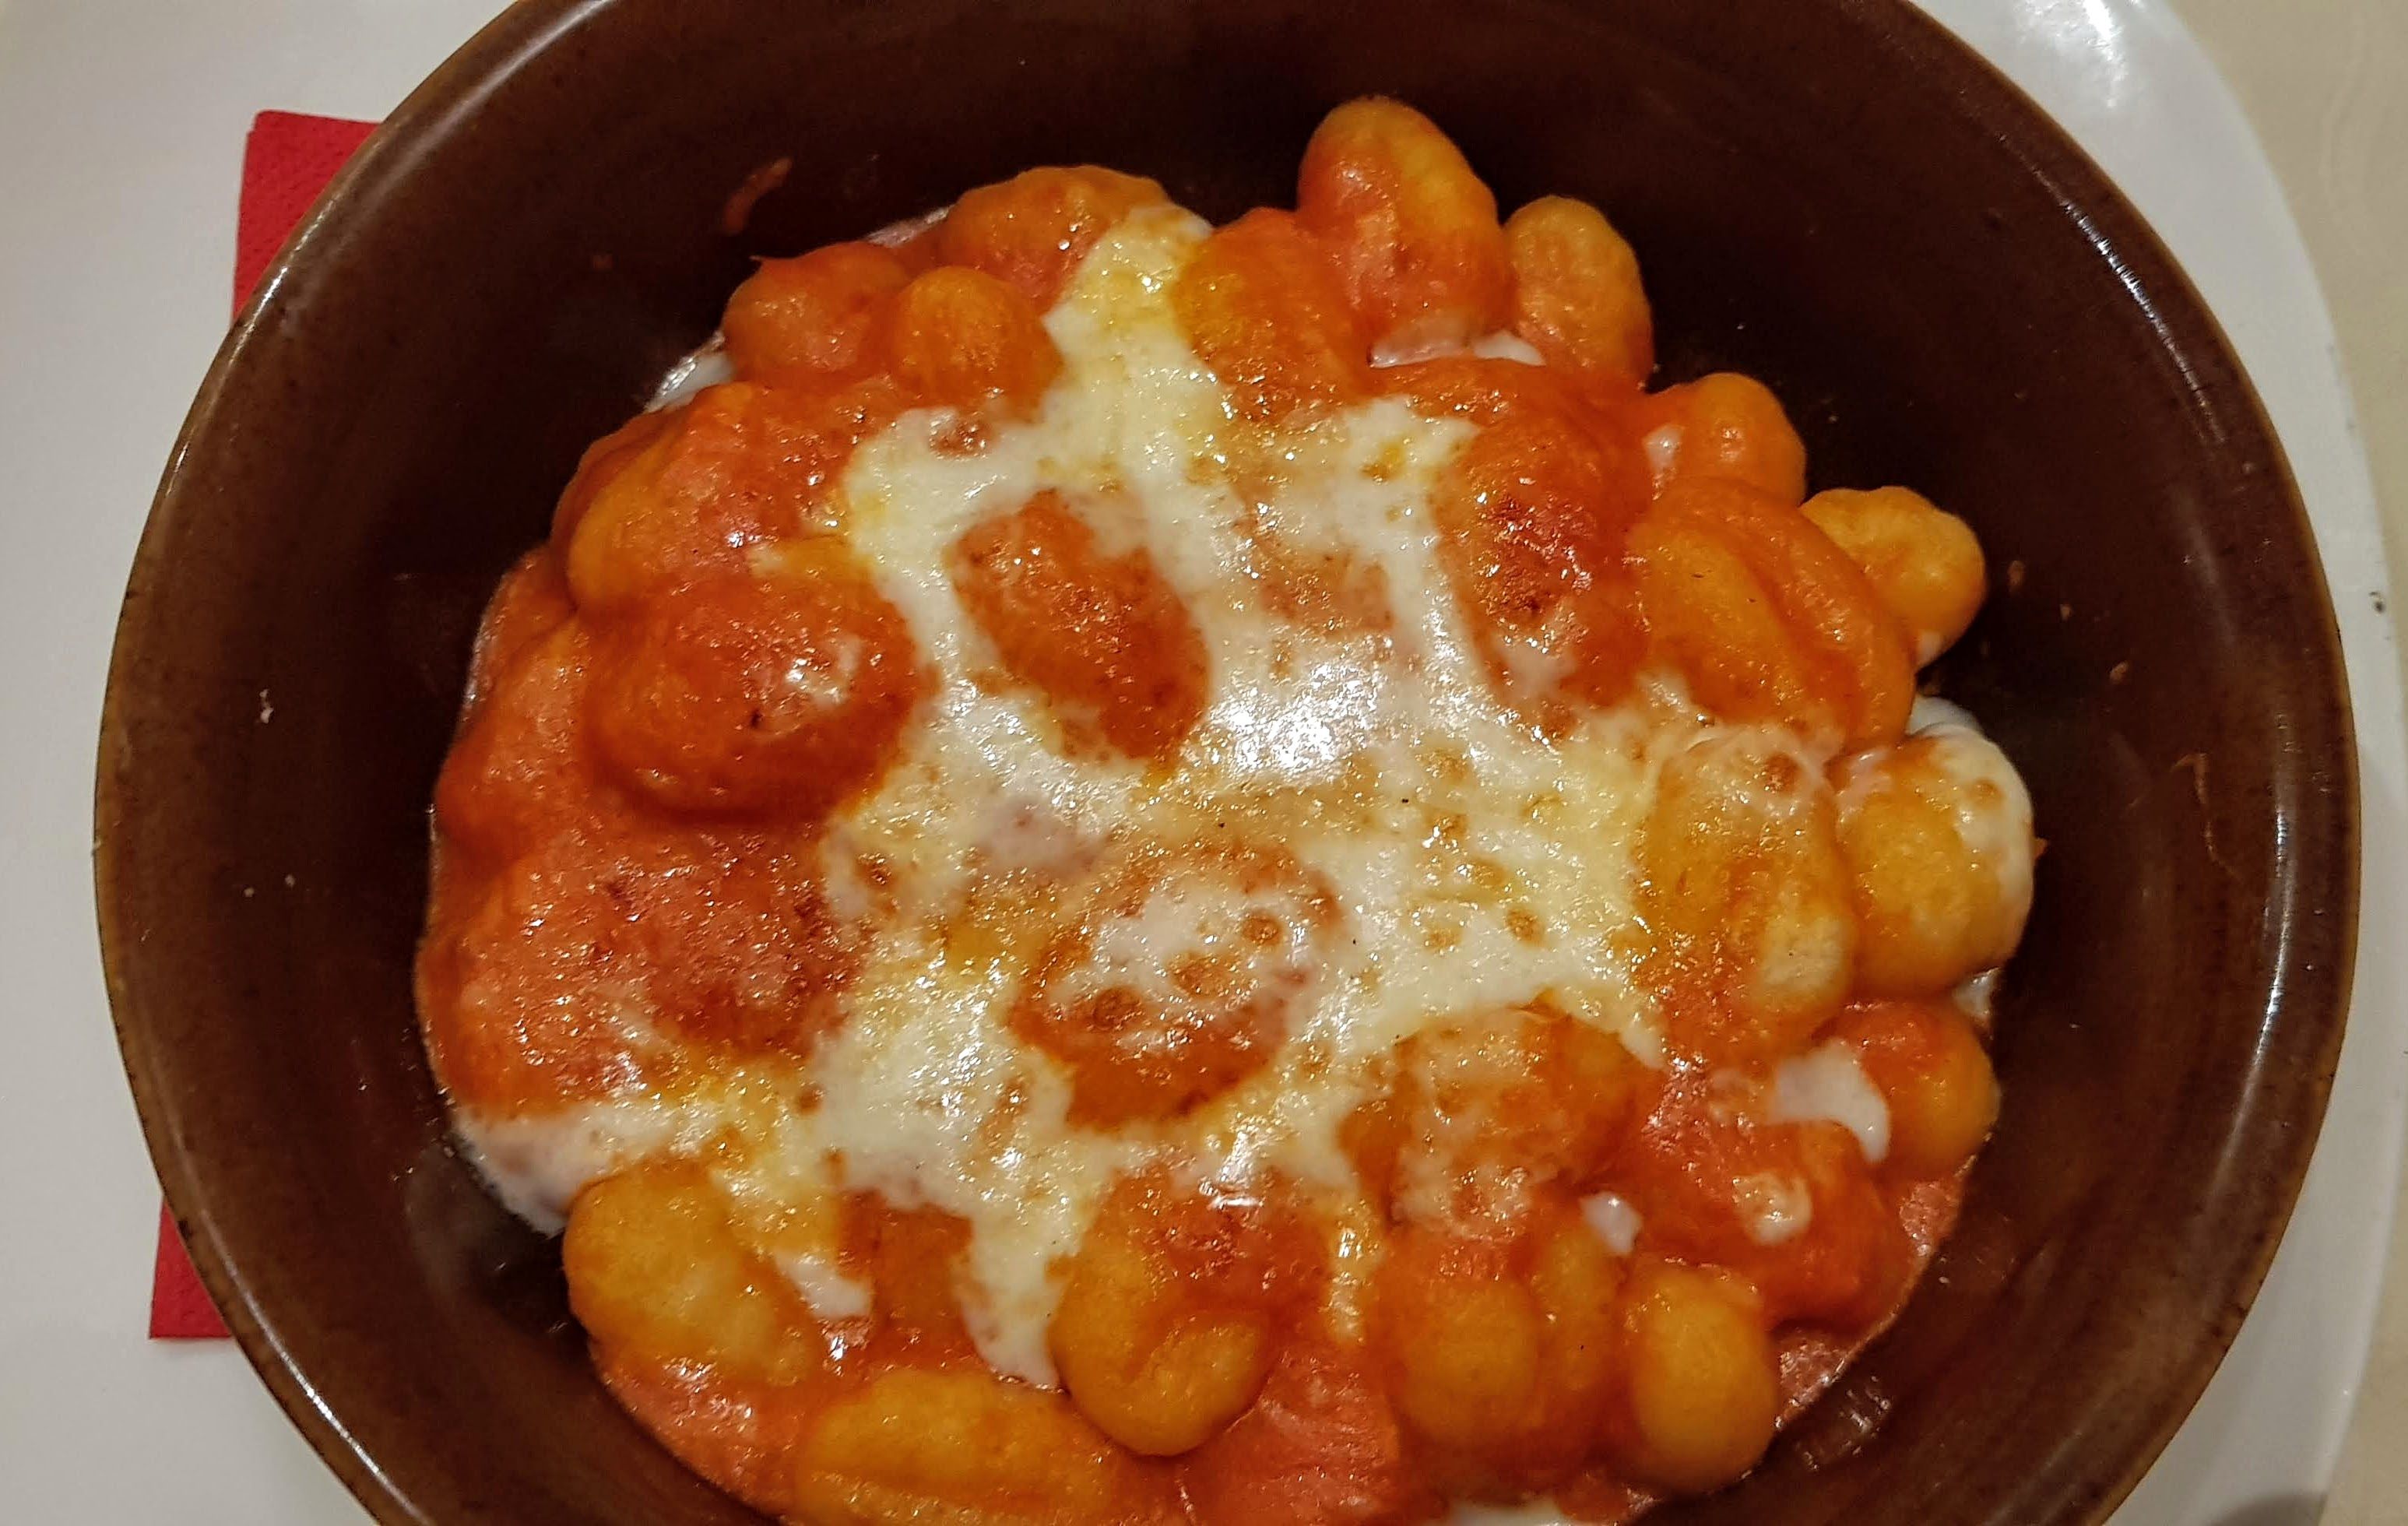 Caption: Gnocchi with tomato sauce and parmesan cheese (Local Guide Petra_M)